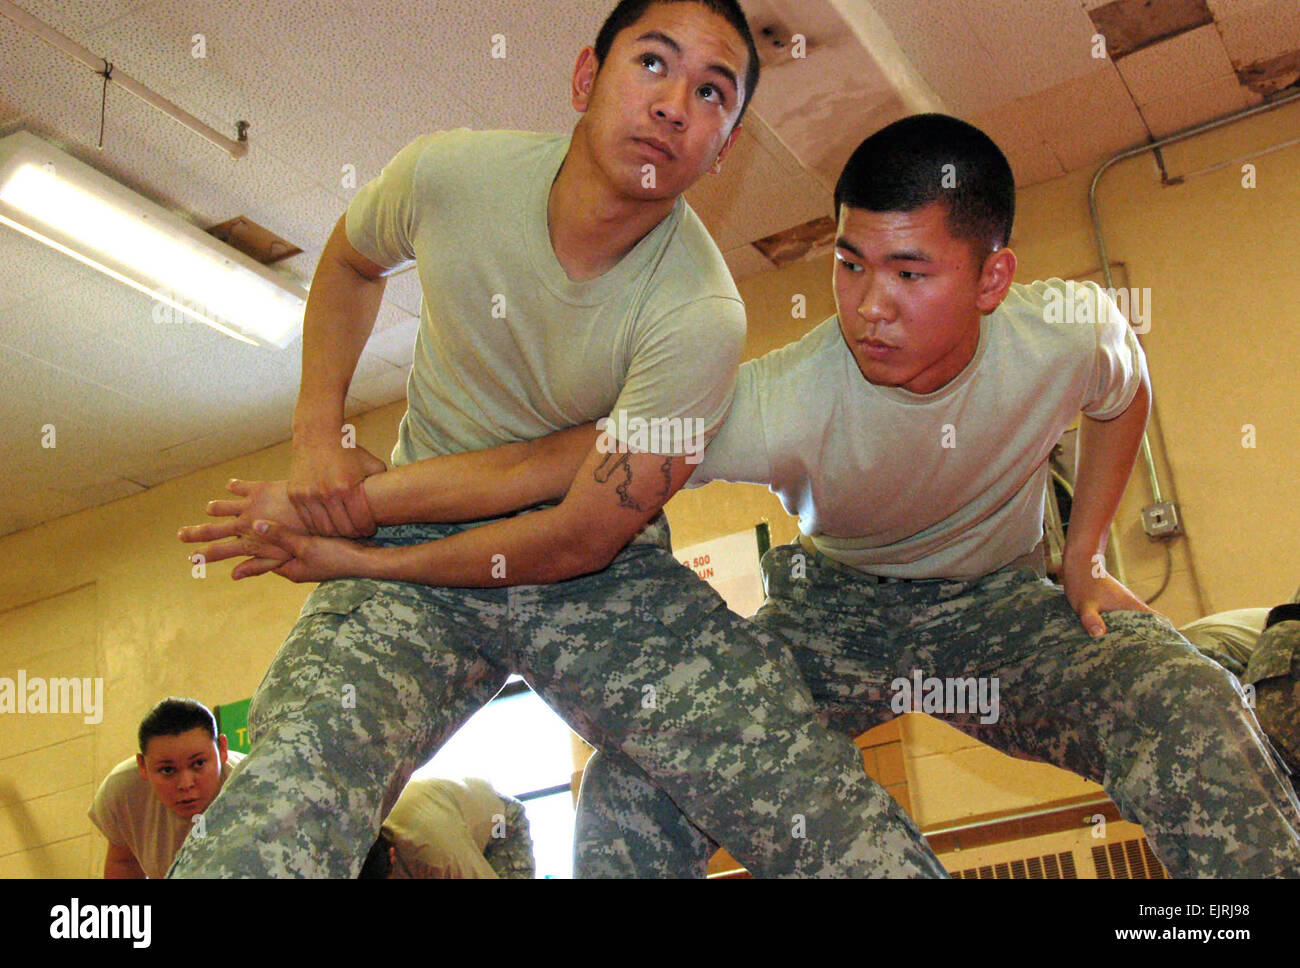 Pfc. Ji Chong left listens to an instructor while putting a submission hold on Pfc. Andrew Bituin during a nonlethal weapons training class at Muscatatuck Urban Training Center in Indiana. The training, designed to induce compliance and control rather than injury, is part of deployment training for Chong and Bituinís unit, 40th Infantry Division. The task force is scheduled to deploy to Kosovo later this year, where they will be conducting law and order and security missions at Camp Bondsteel. Stock Photo